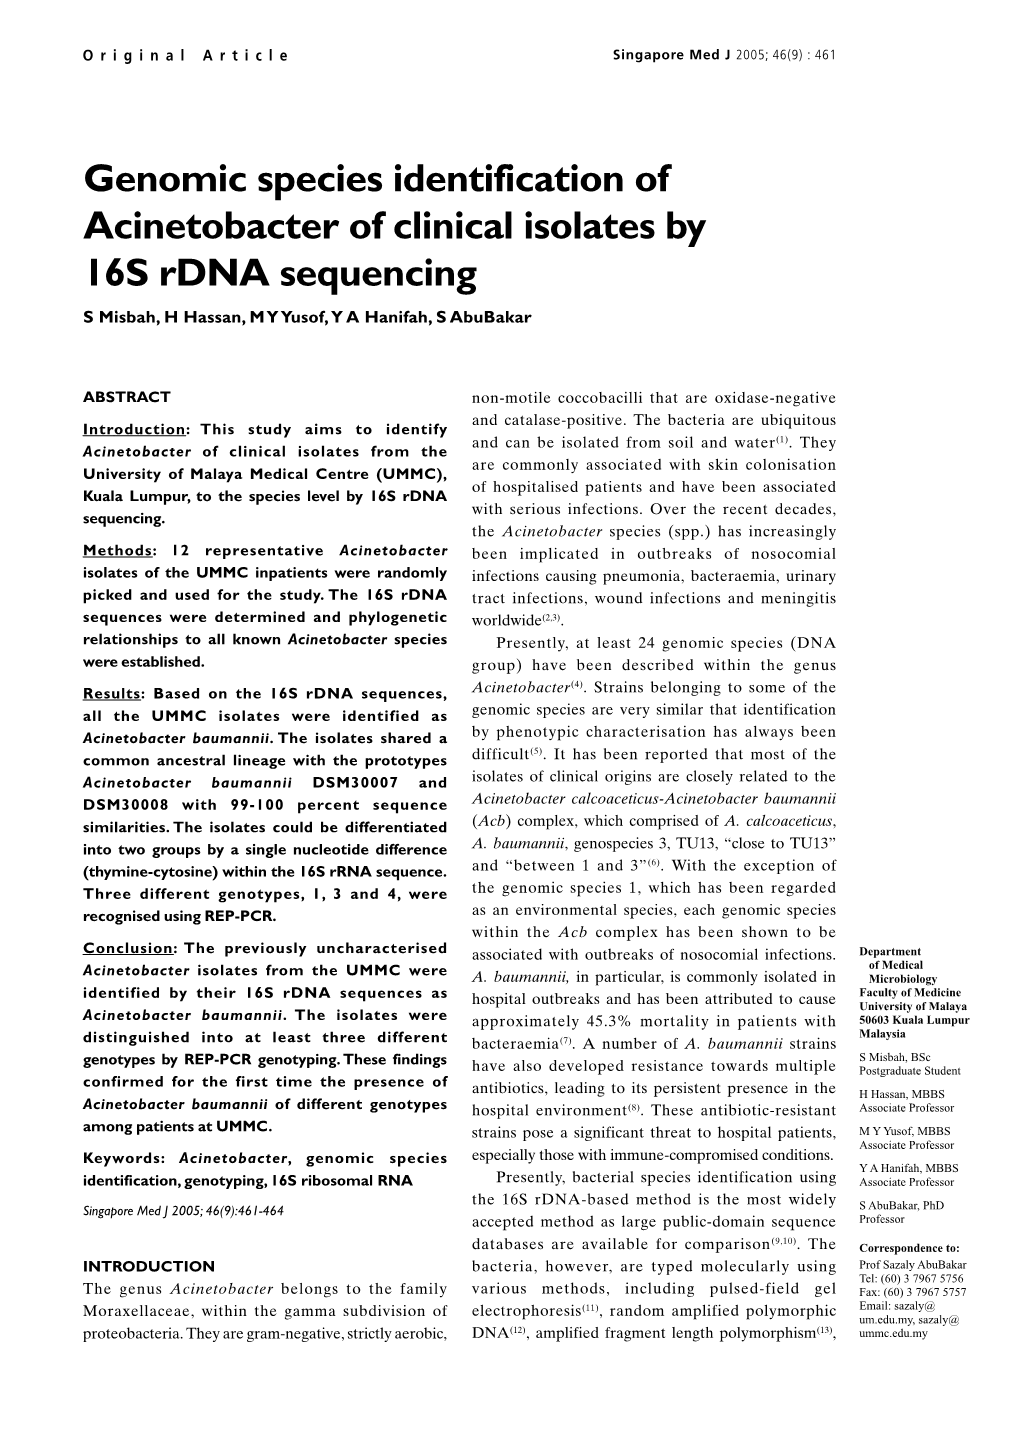 Genomic Species Identification of Acinetobacter of Clinical Isolates by 16S Rdna Sequencing S Misbah, H Hassan, M Y Yusof, Y a Hanifah, S Abubakar